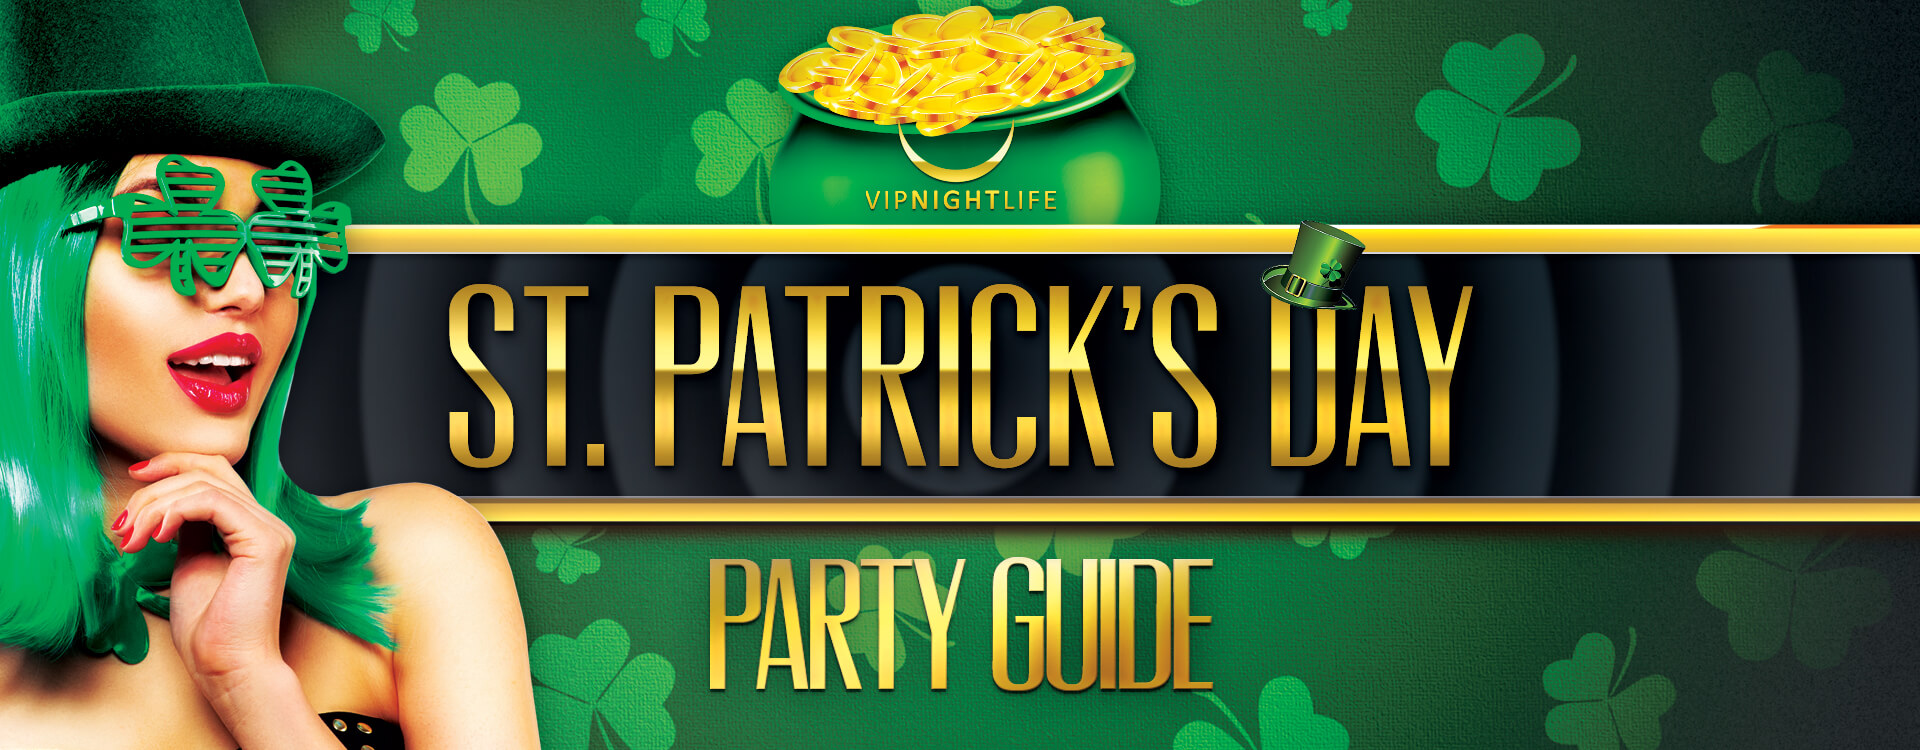 St. Patrick's Day Special Events Guide